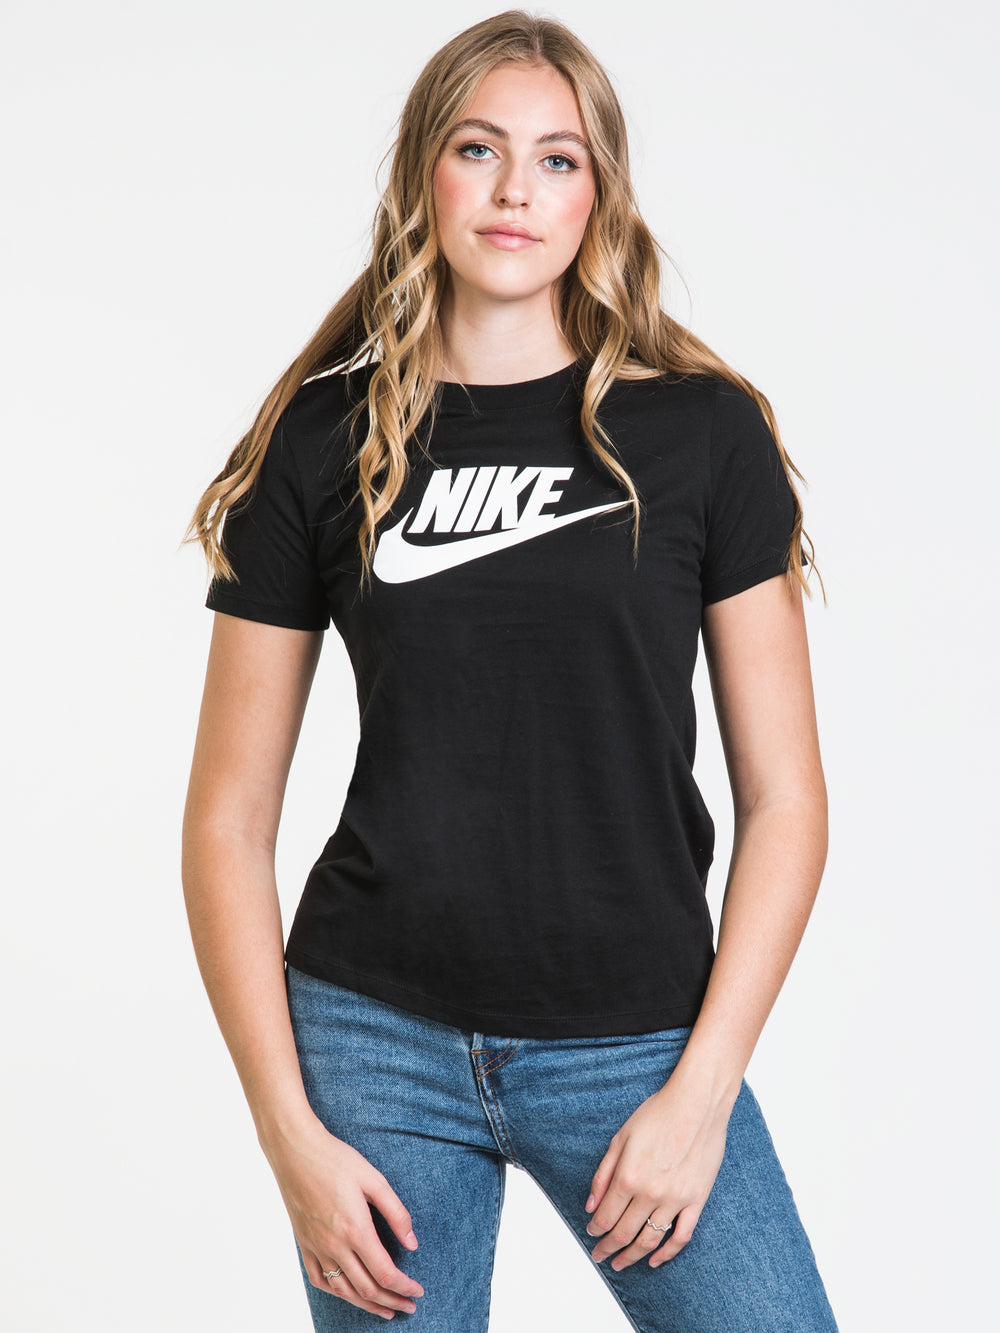 NIKE ESSENTIALS ICON T-SHIRT  - CLEARANCE